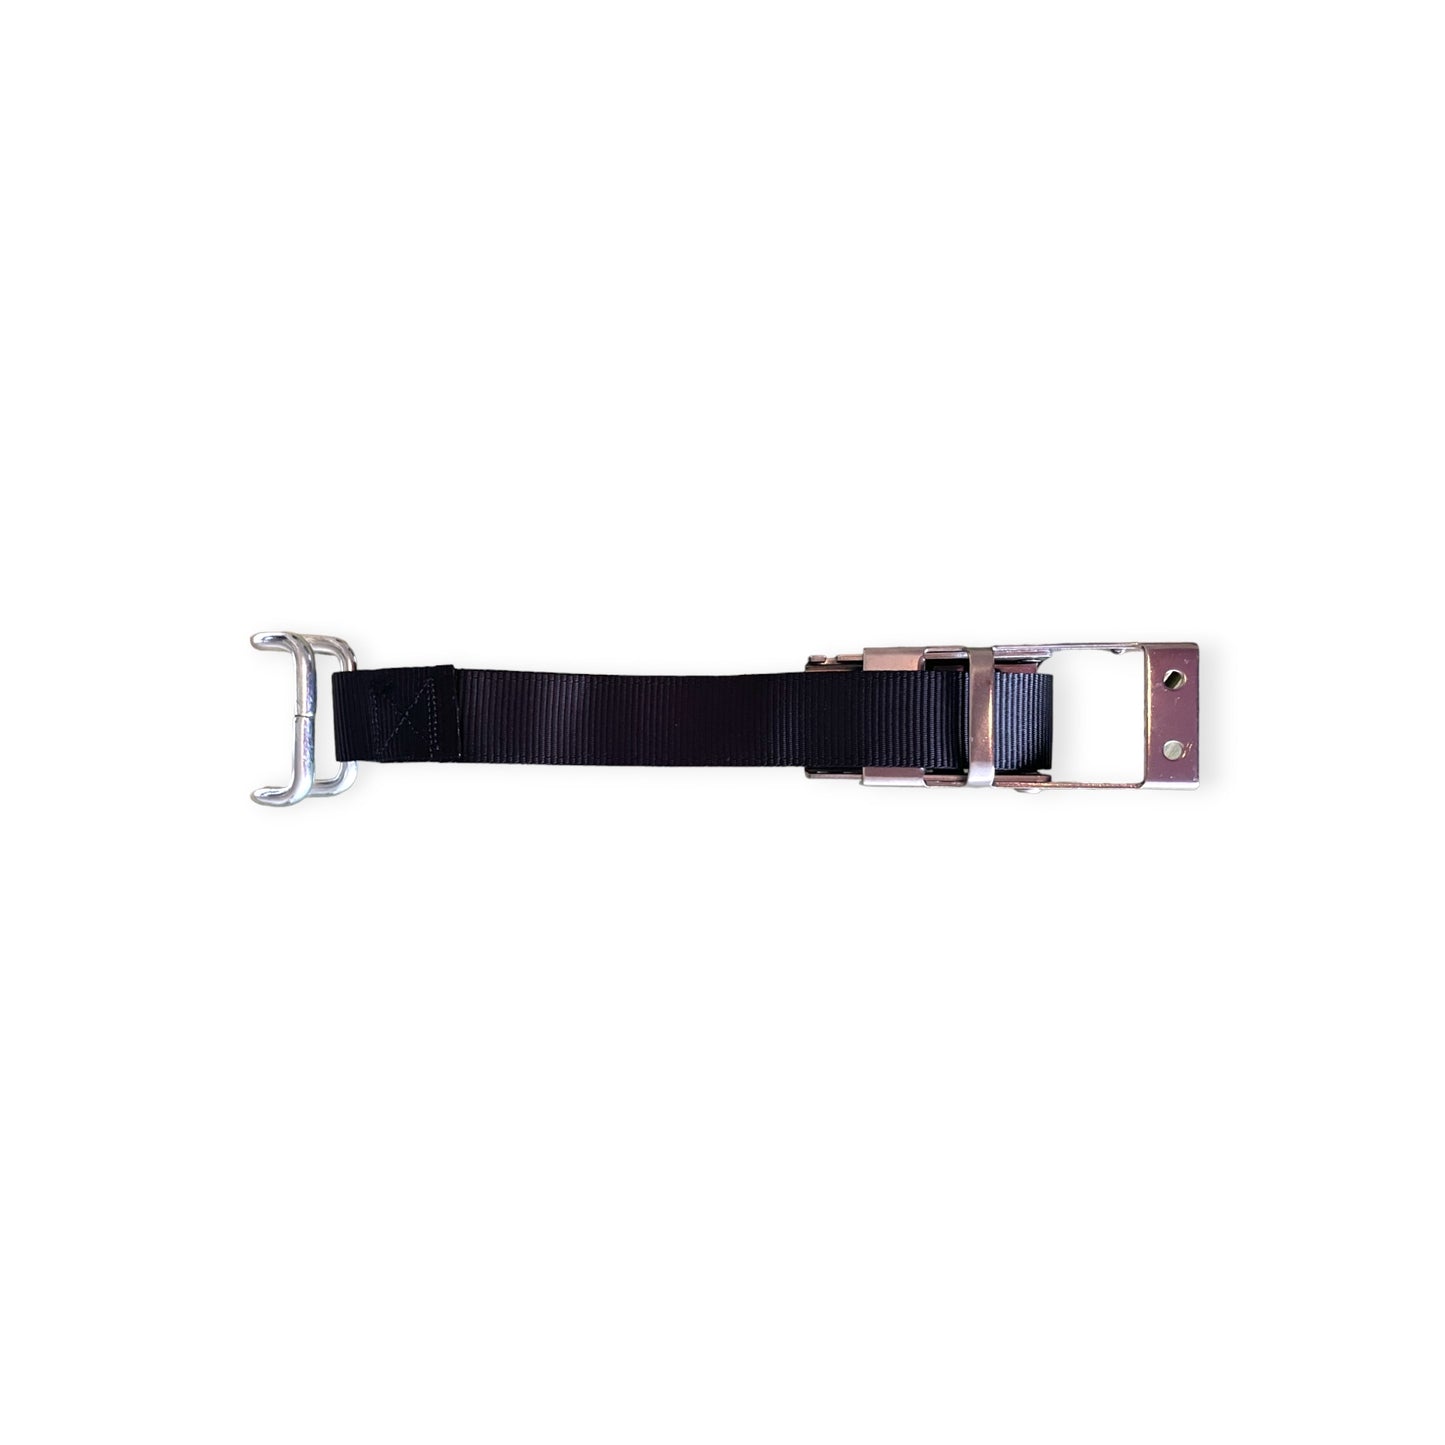 Non Branded Trailer Strap Buckle With Bottom Strap